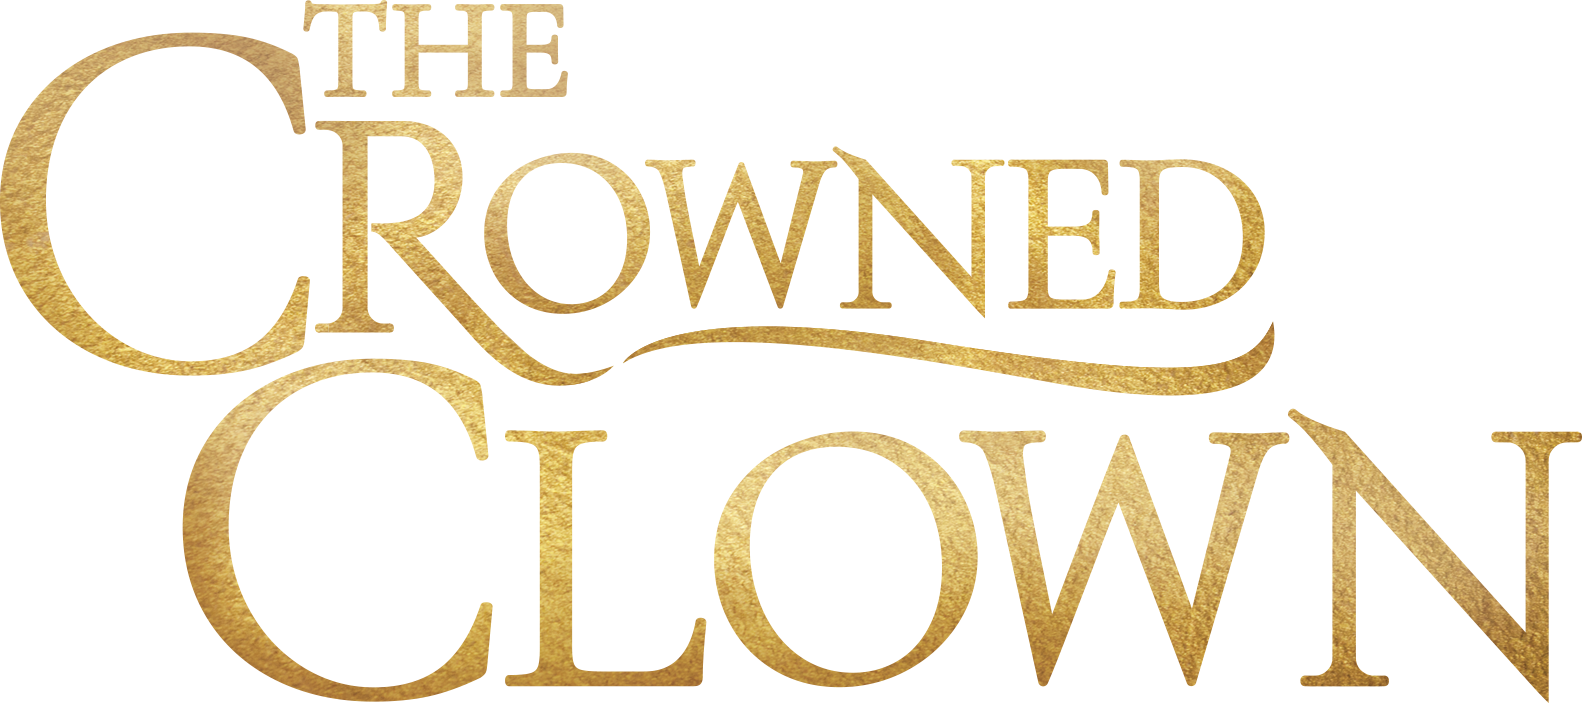 The Crowned Clown